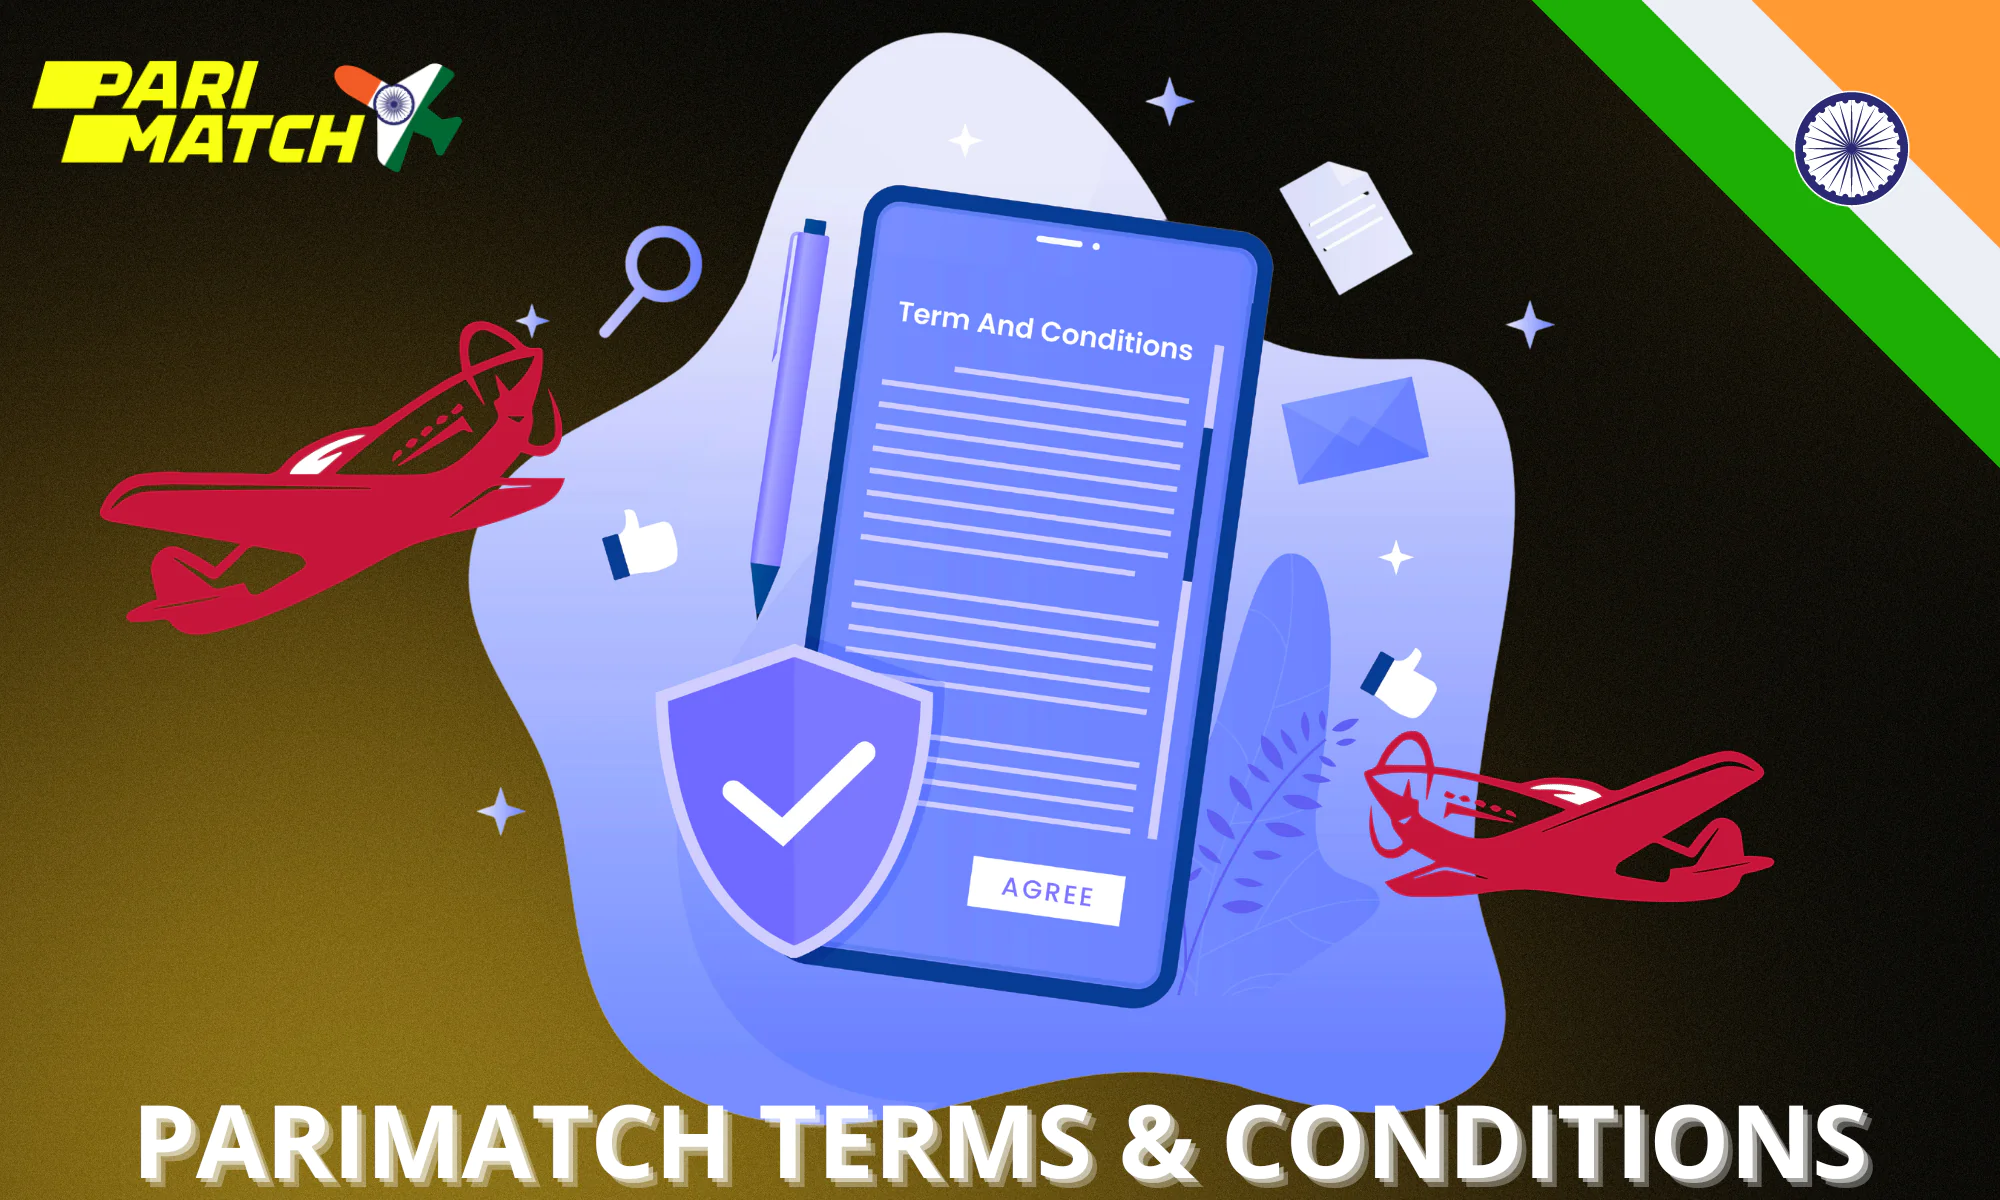 Here you can find the terms and conditions of Parimatch for players from India